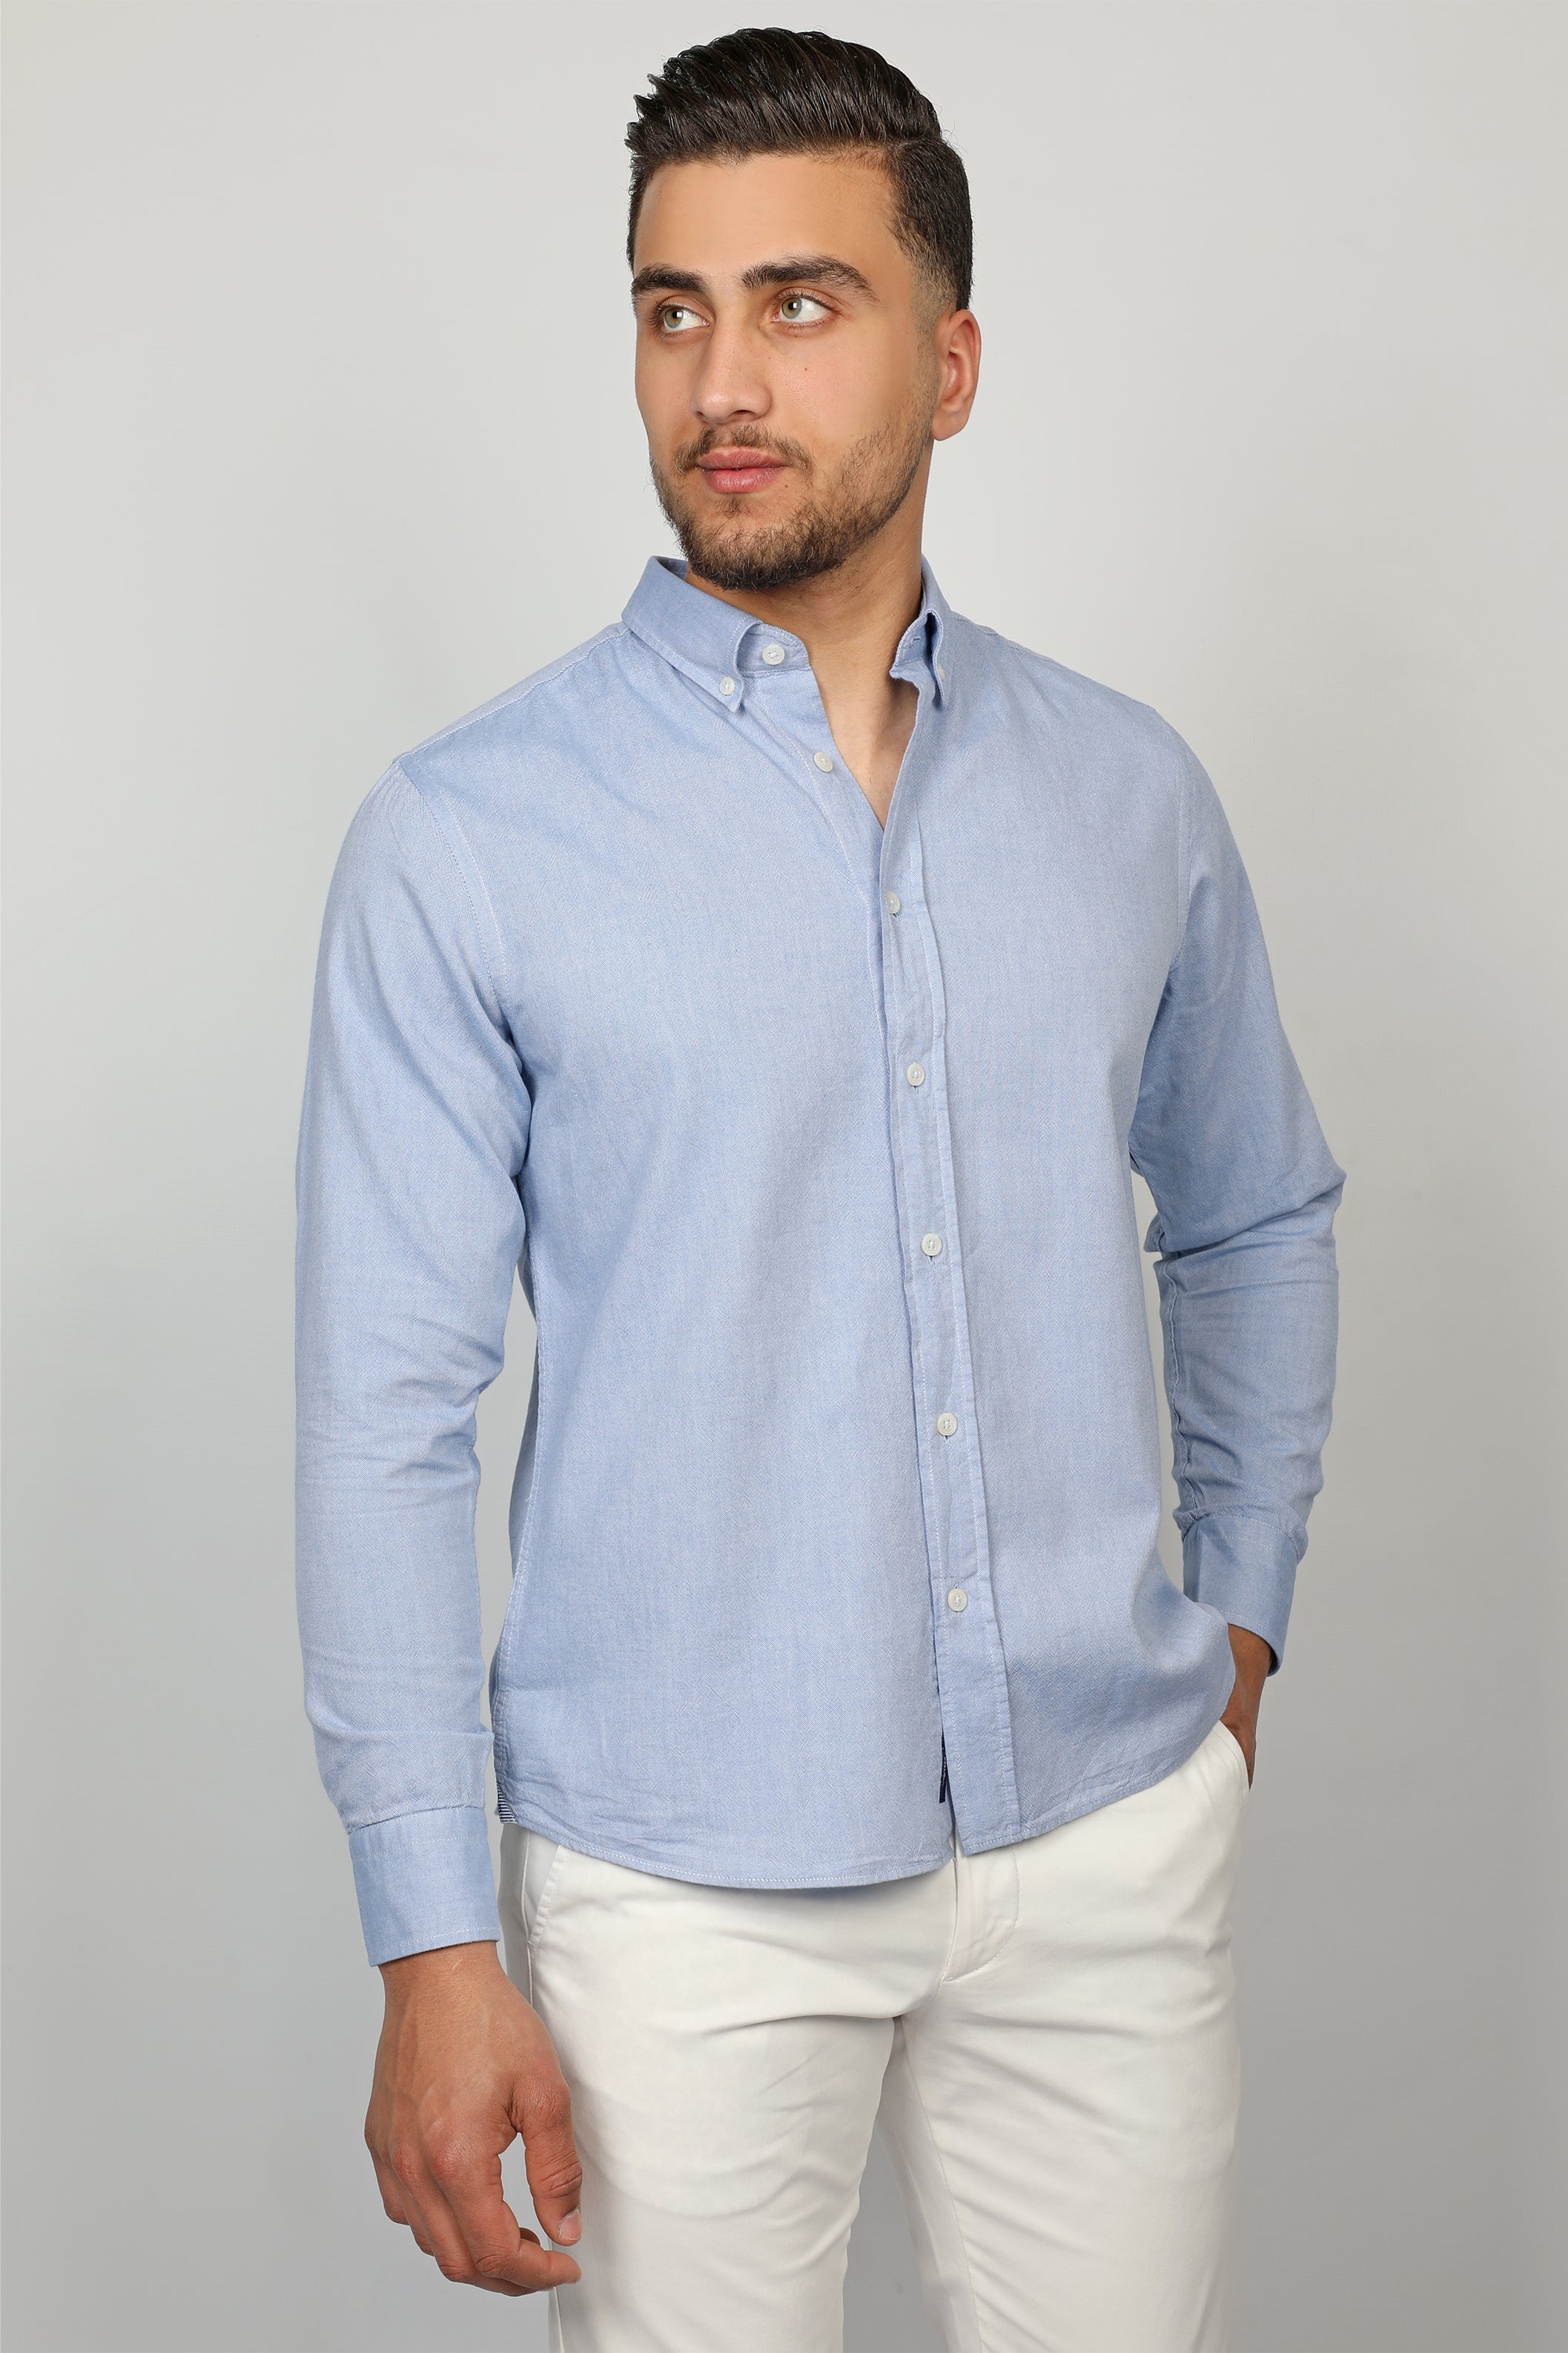 Blue Linen Shirt With White Button